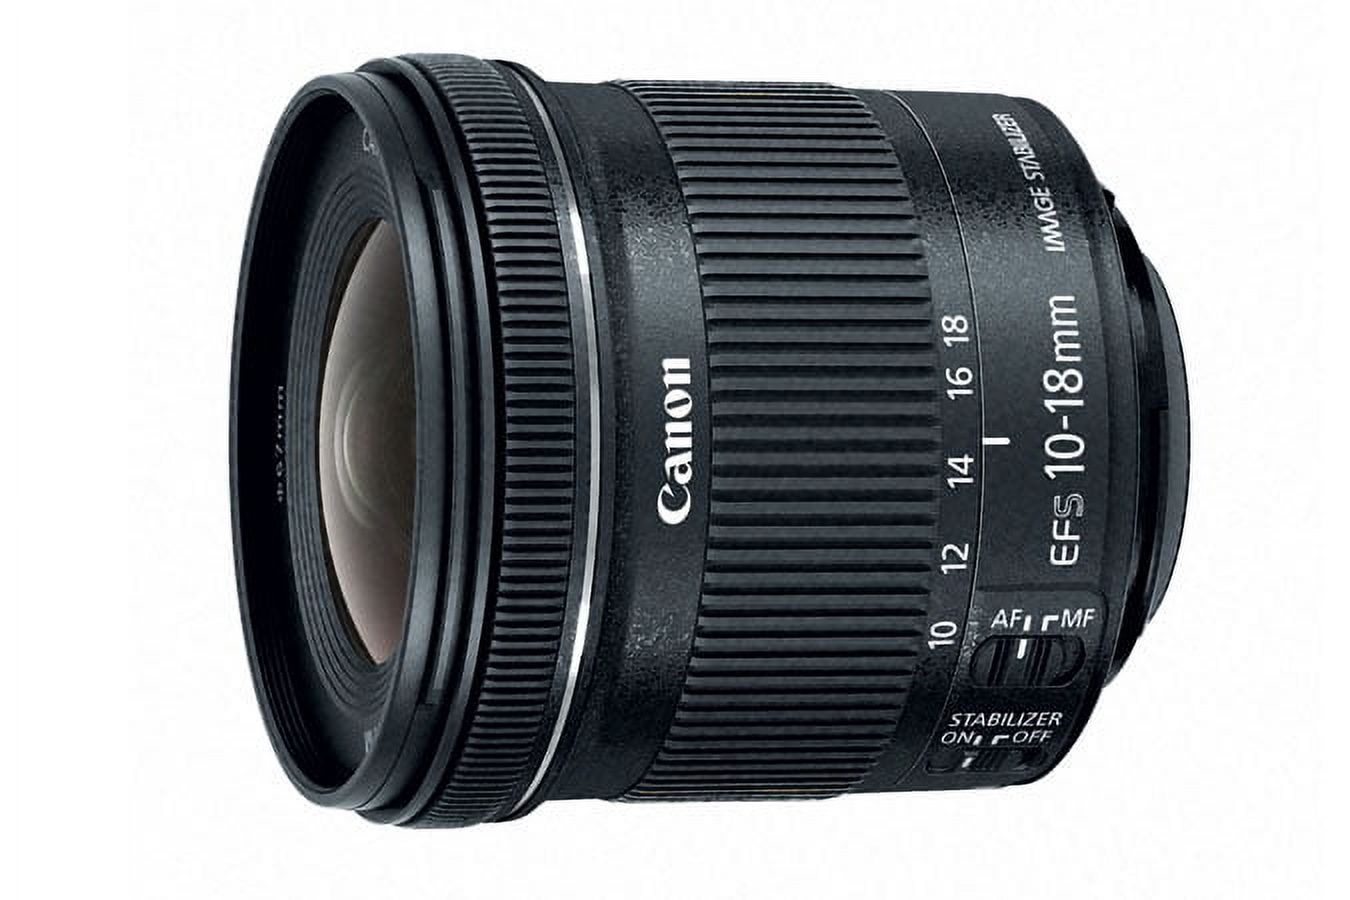 Canon EF-S 10-18mm f/4.5-5.6 IS STM Lens - image 1 of 14